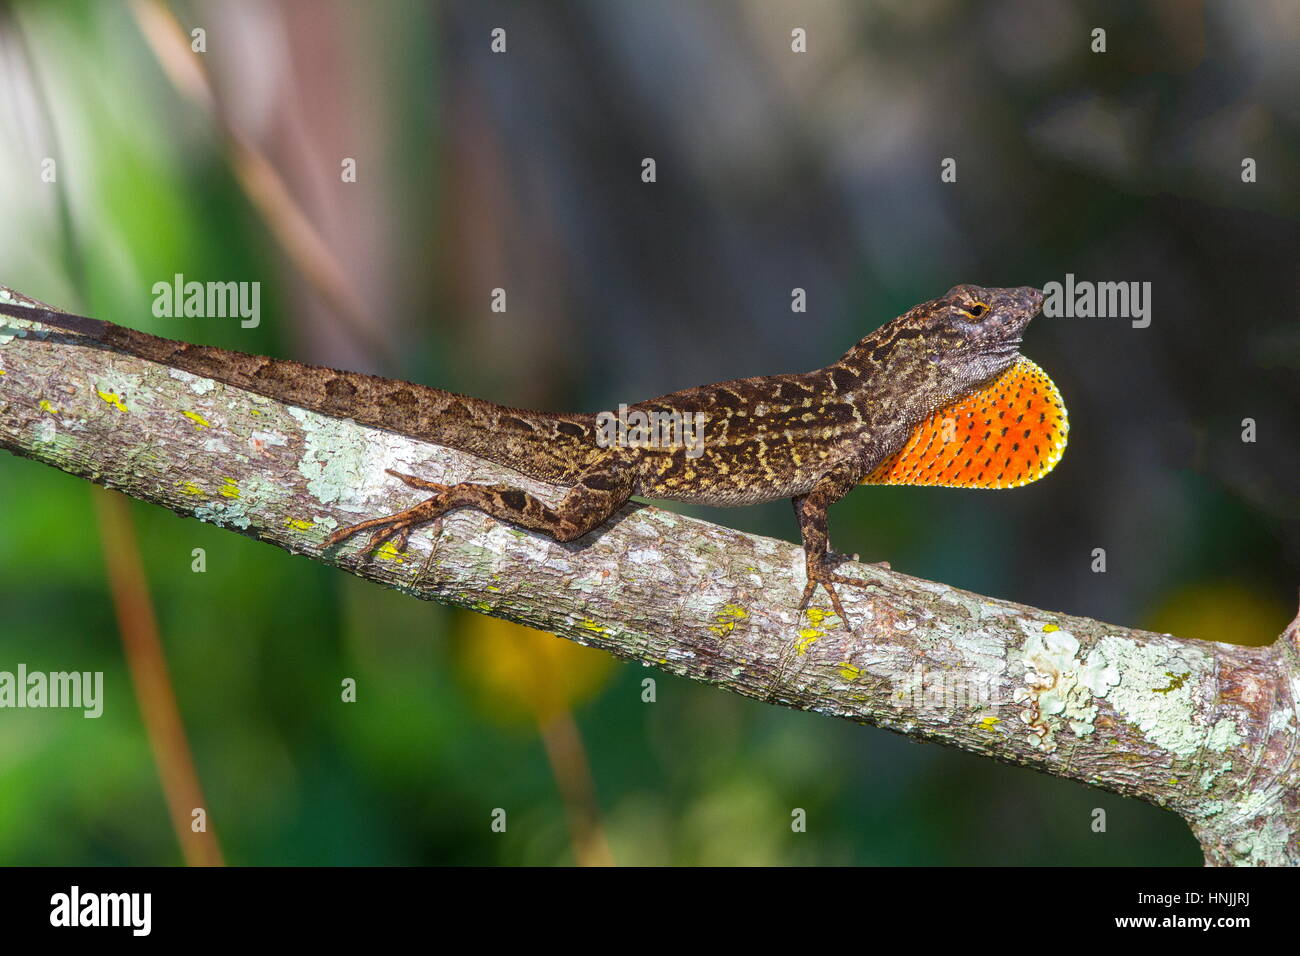 A male brown anole, Anolis sagrei, has expanded its dewlap in colorful territorial display. Stock Photo